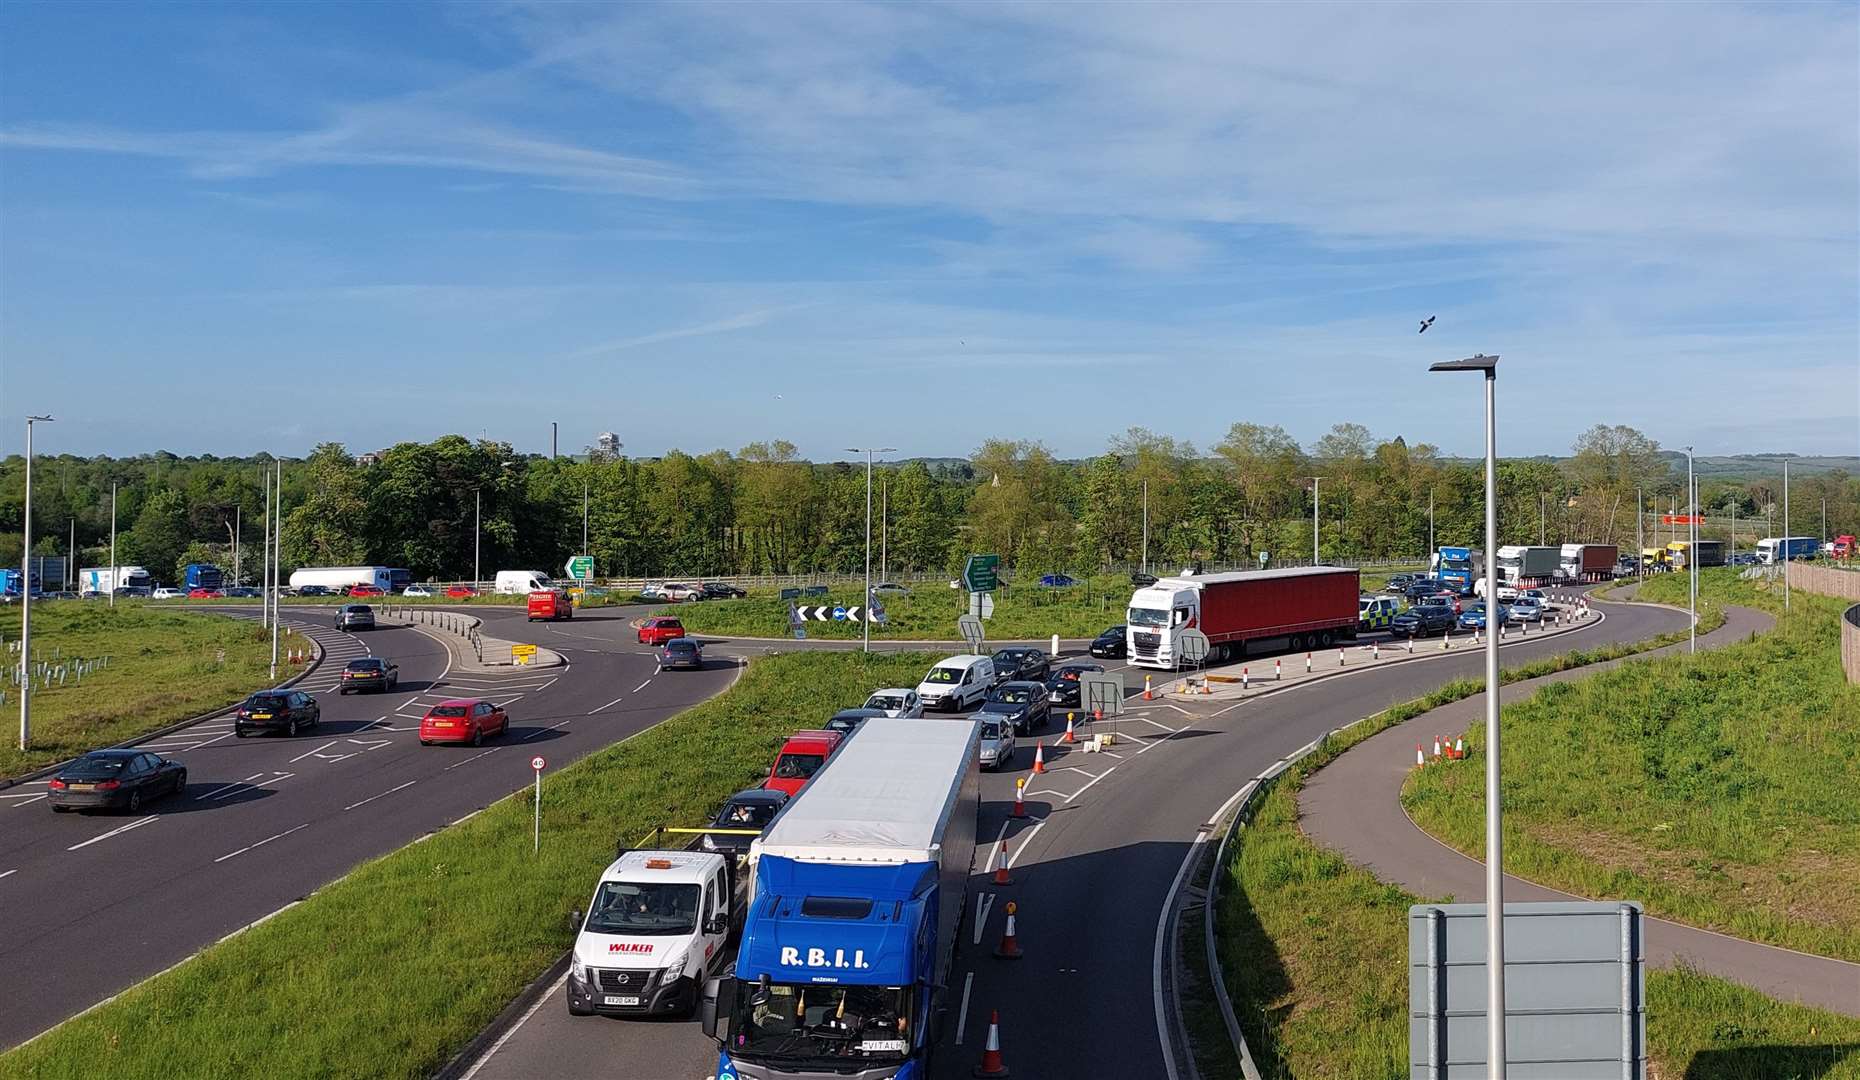 Huge tailbacks occurred when the restrictions were first introduced on the A2070